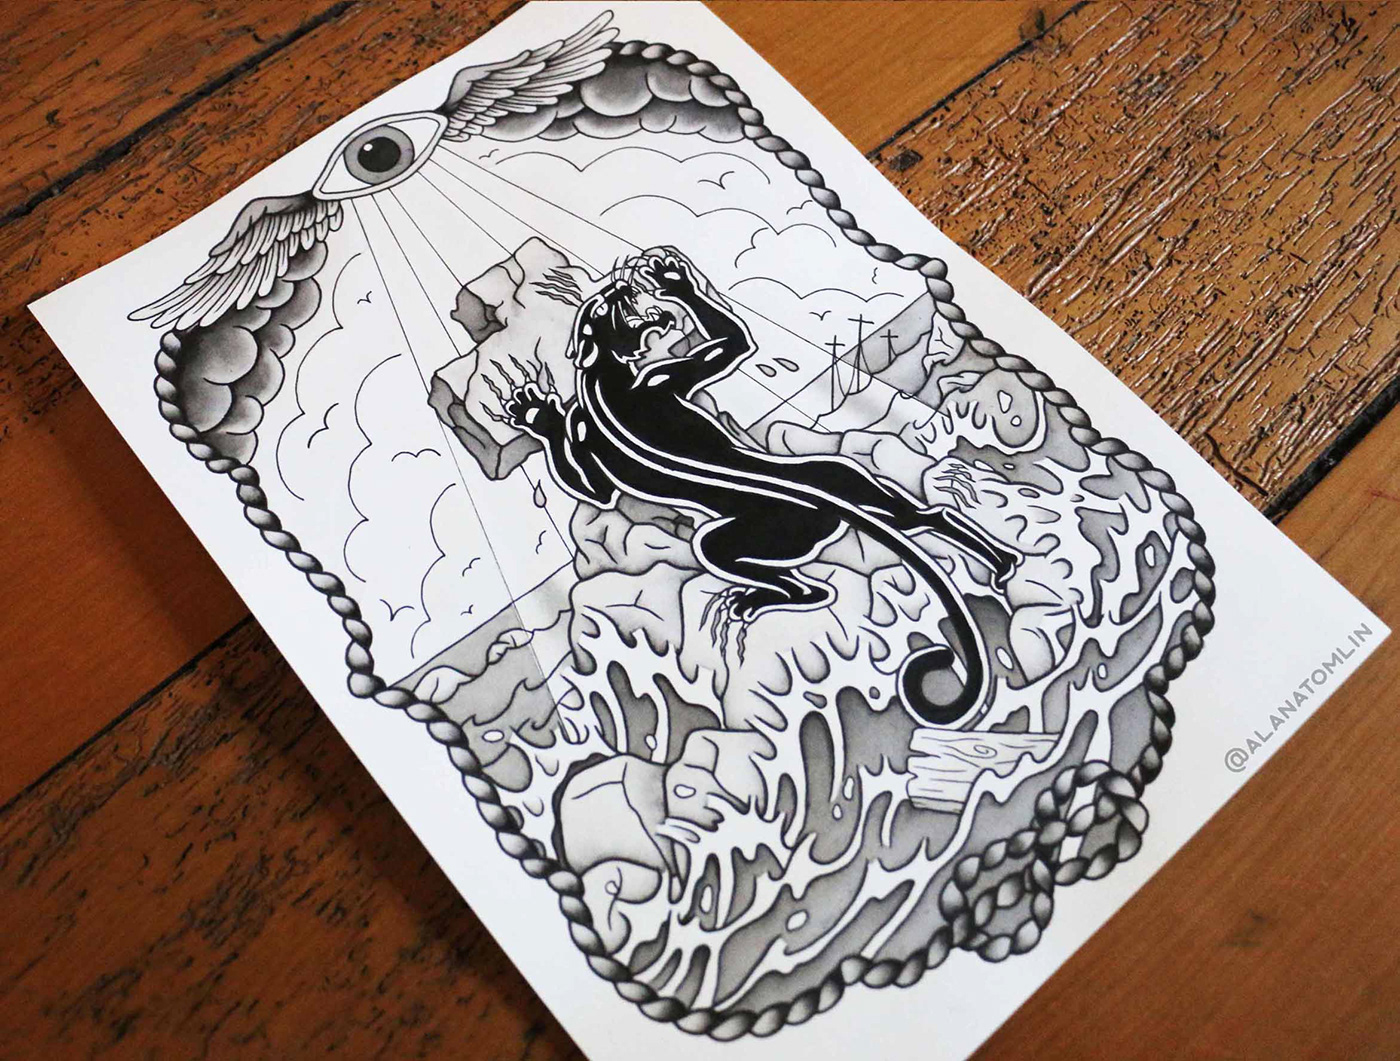 Rock of Ages panther tattoo faith Shipwreck storm alanatomlin alana tomlin american traditional ink painting